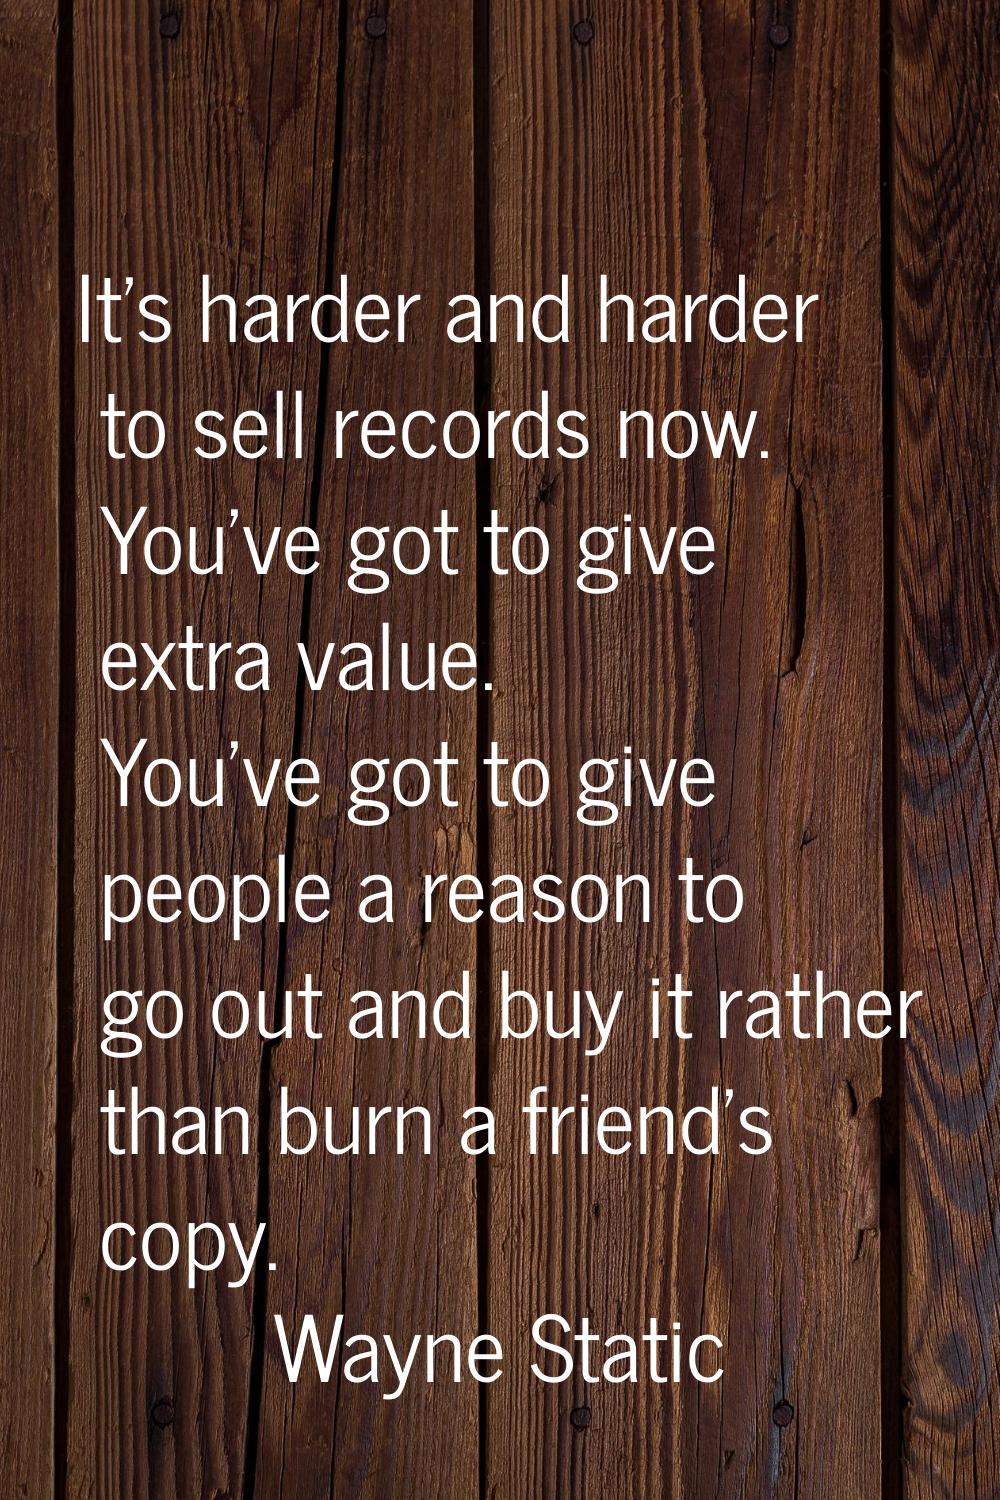 It's harder and harder to sell records now. You've got to give extra value. You've got to give peop